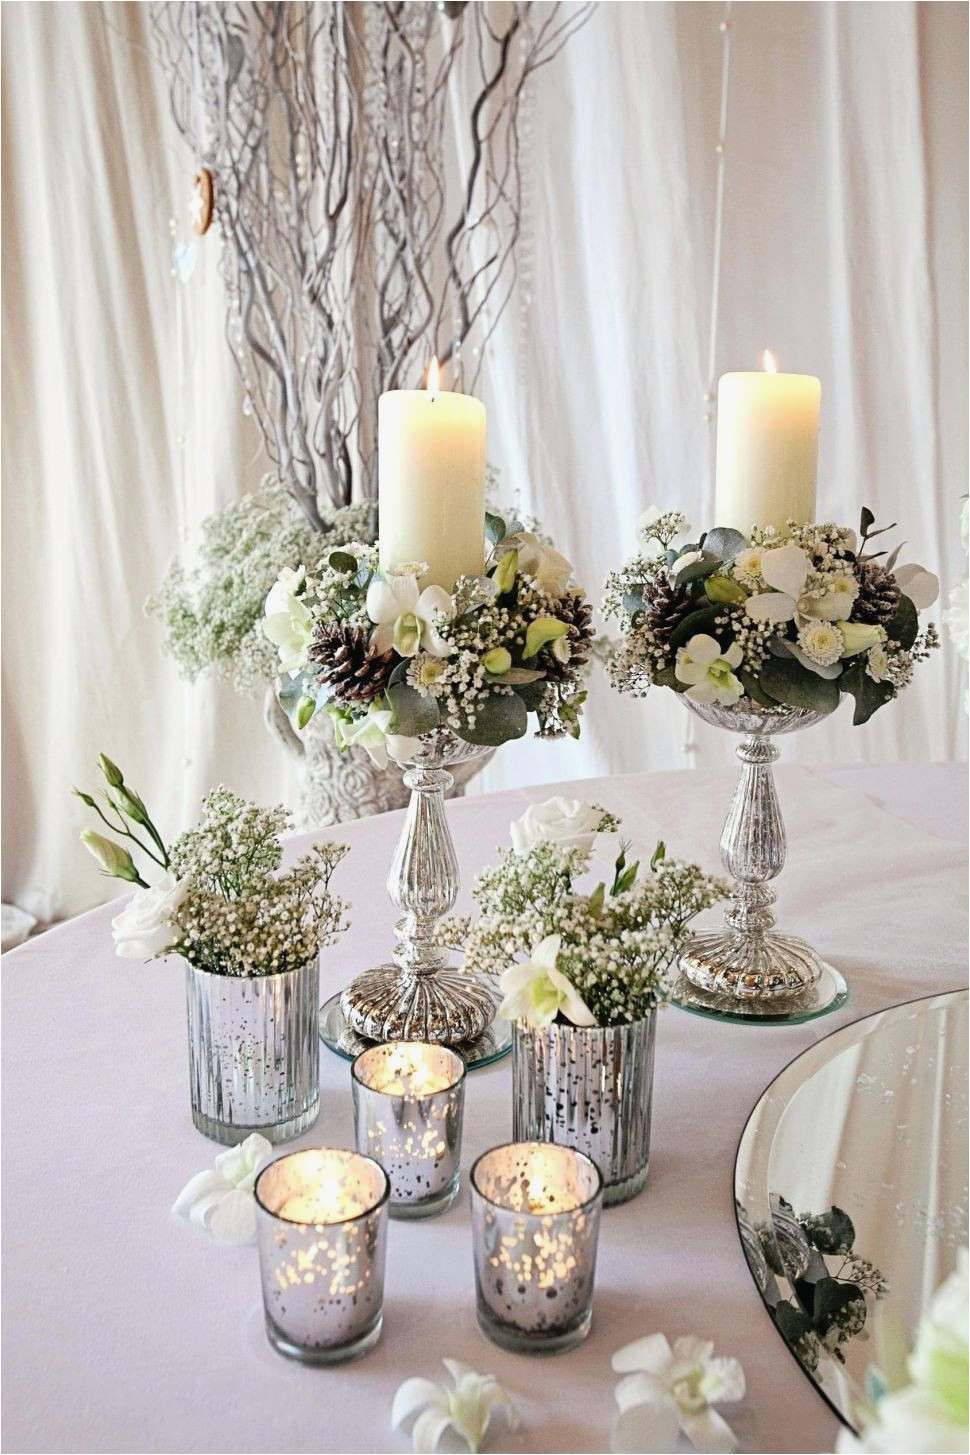 21 Lovable 3 Vase Centerpiece Ideas 2024 free download 3 vase centerpiece ideas of 28 cool wedding reception decoration ideas trending best wedding inside cool living room vases wholesale new h vases big tall i 0d for cheap design wedding